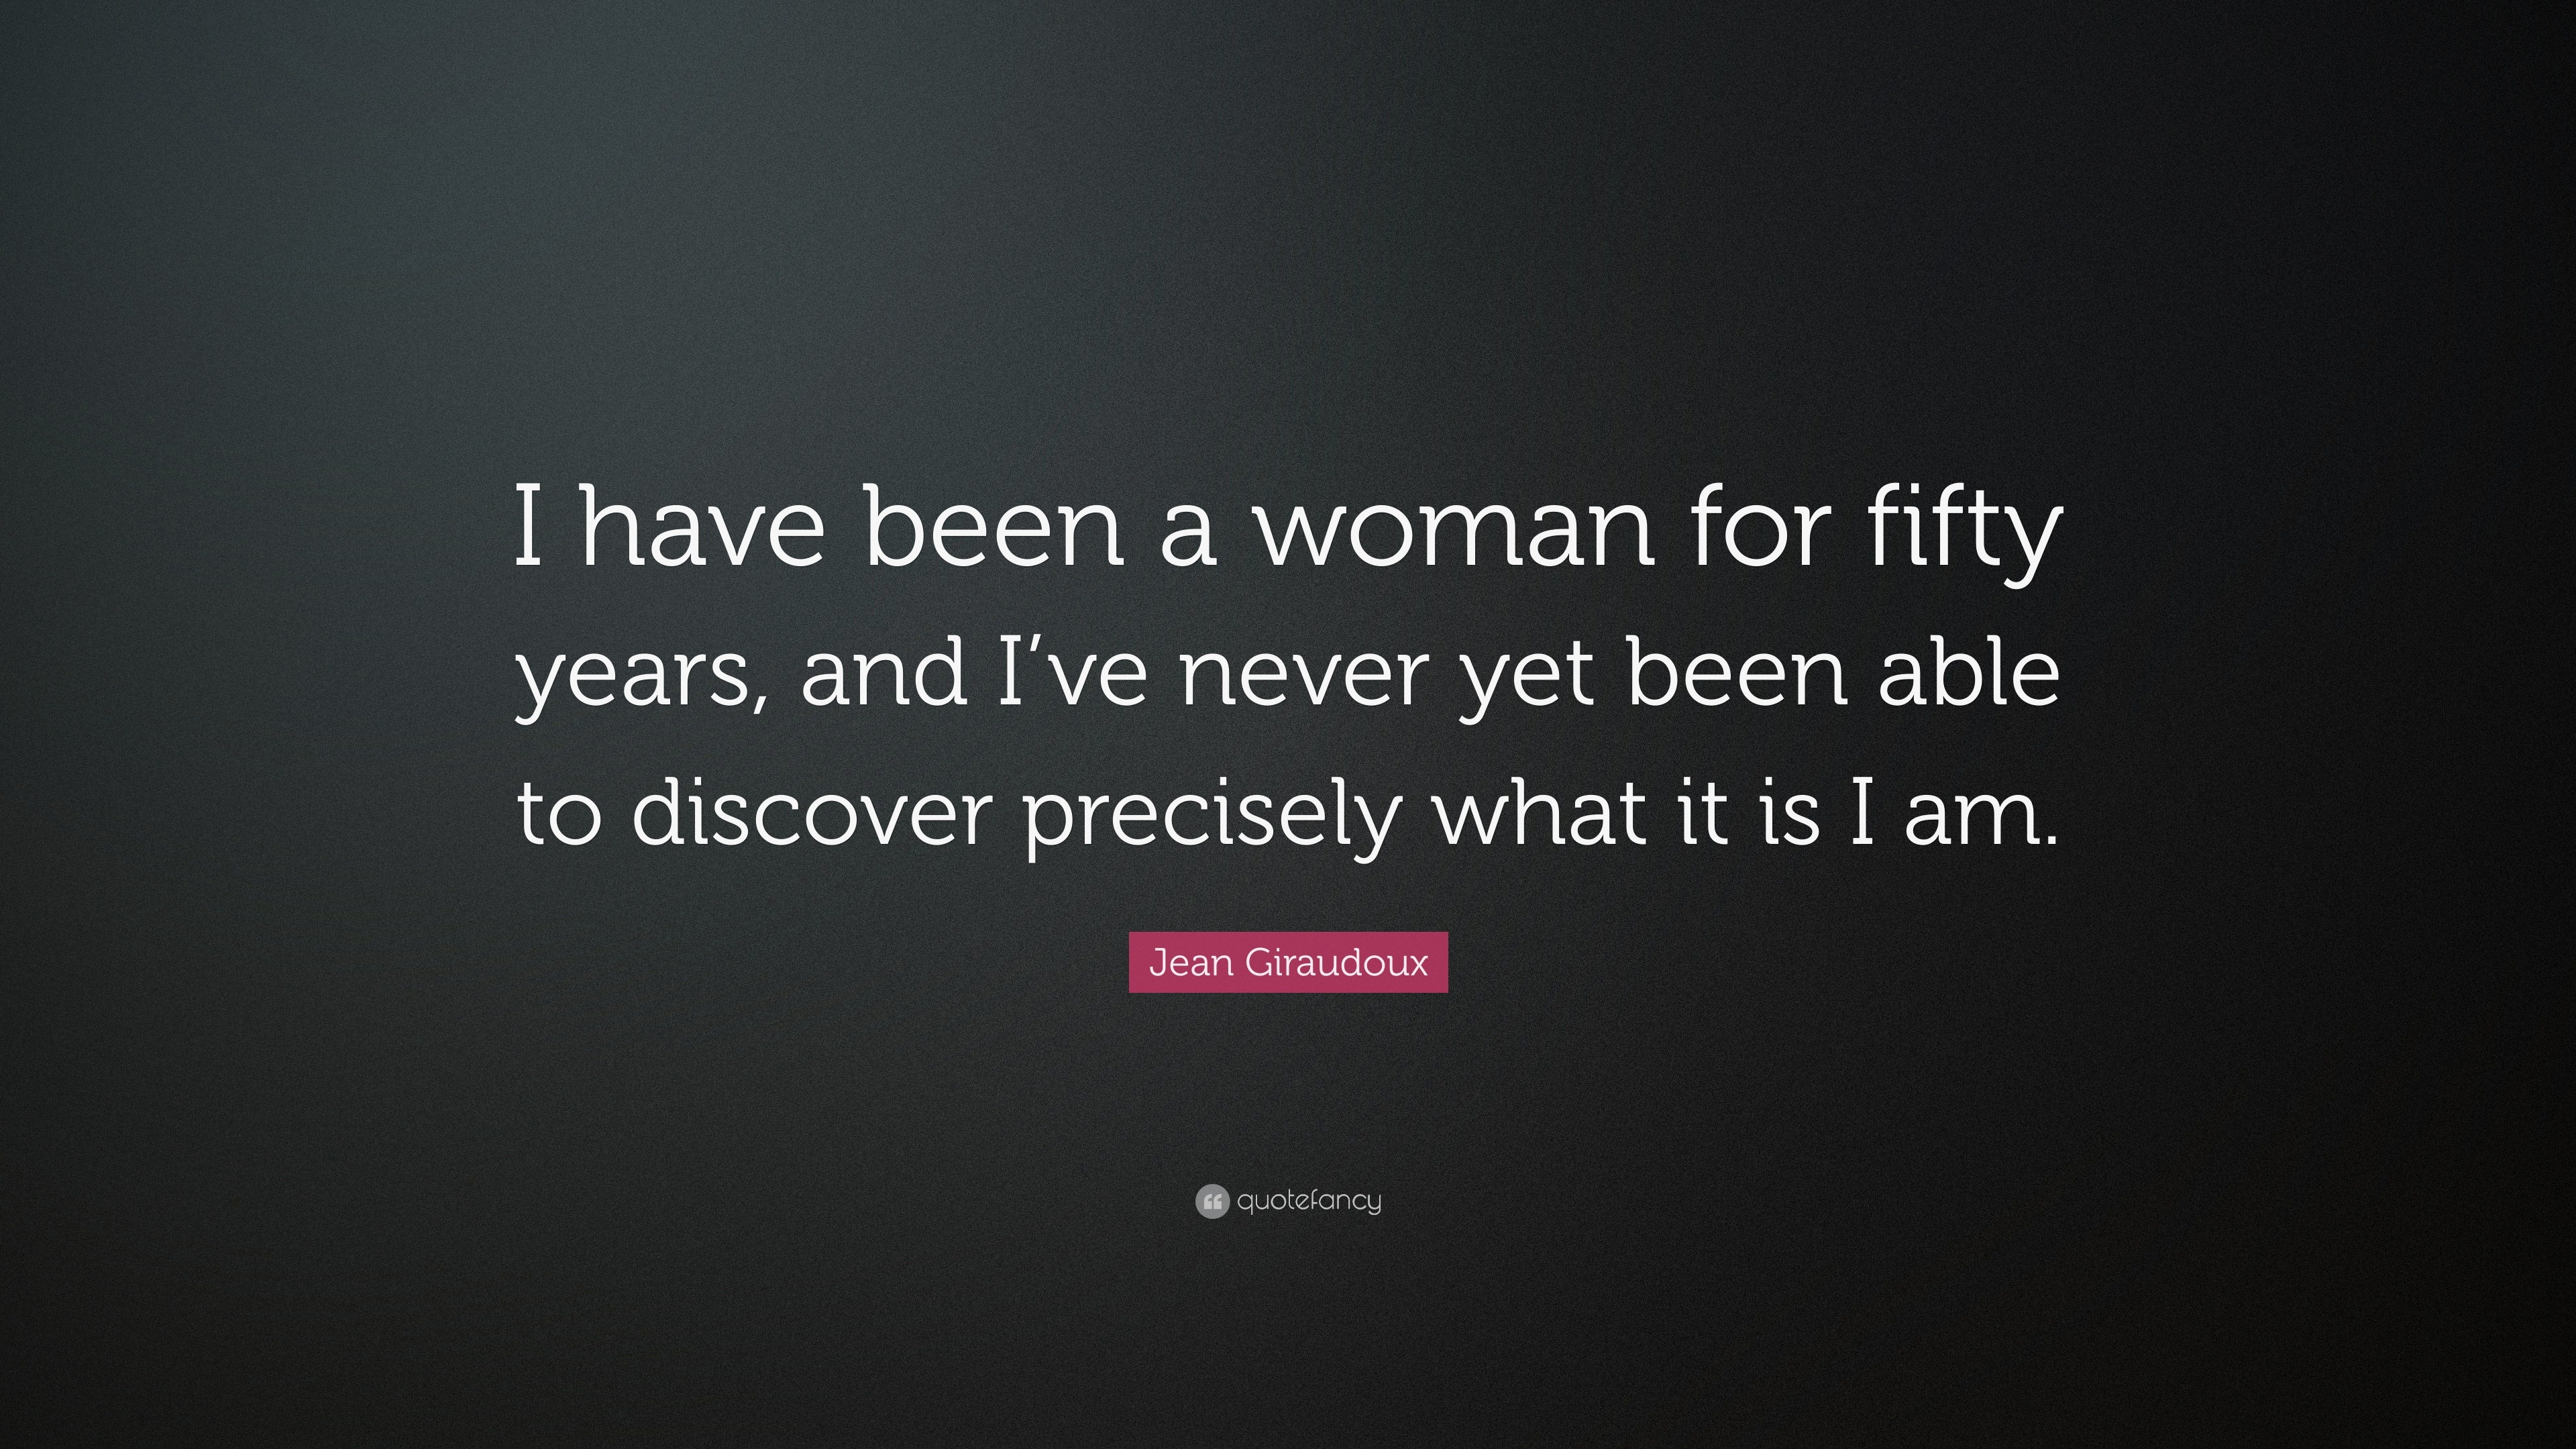 Jean Giraudoux Quote: “I have been a woman for fifty years, and I’ve ...